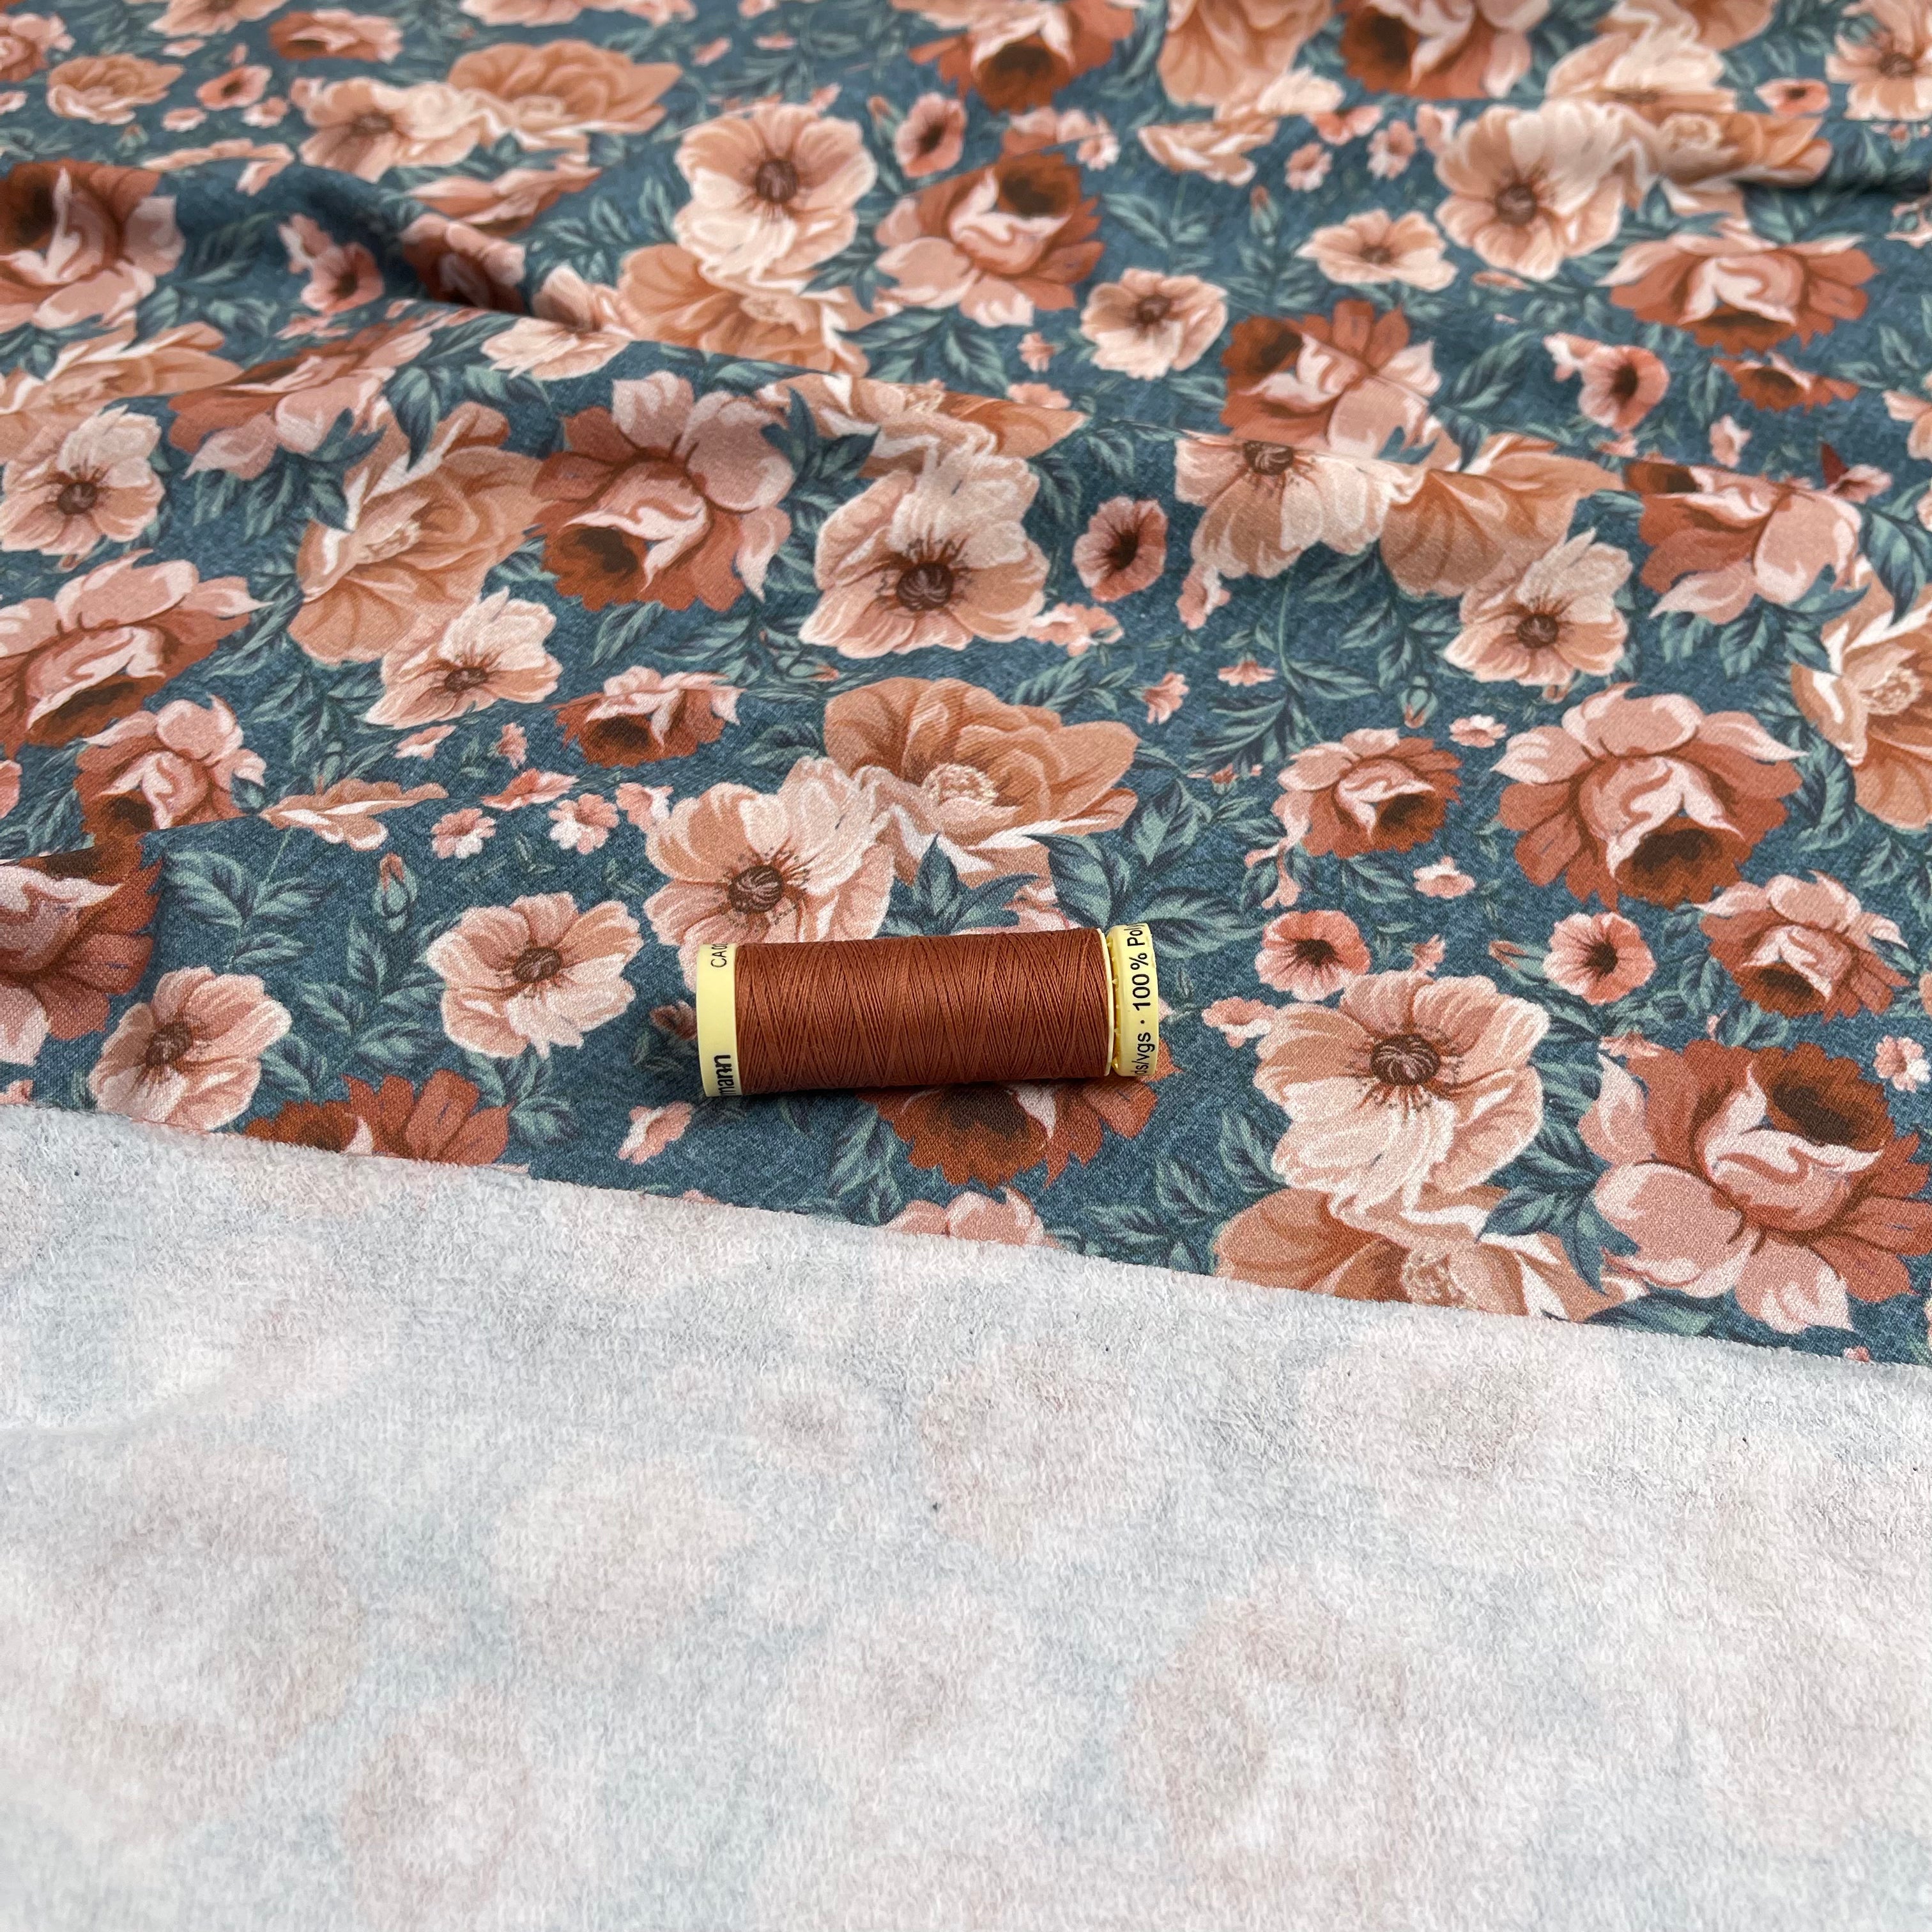 Watercolour Roses Sienna on Light Teal Cotton Sweat-shirting Fabric